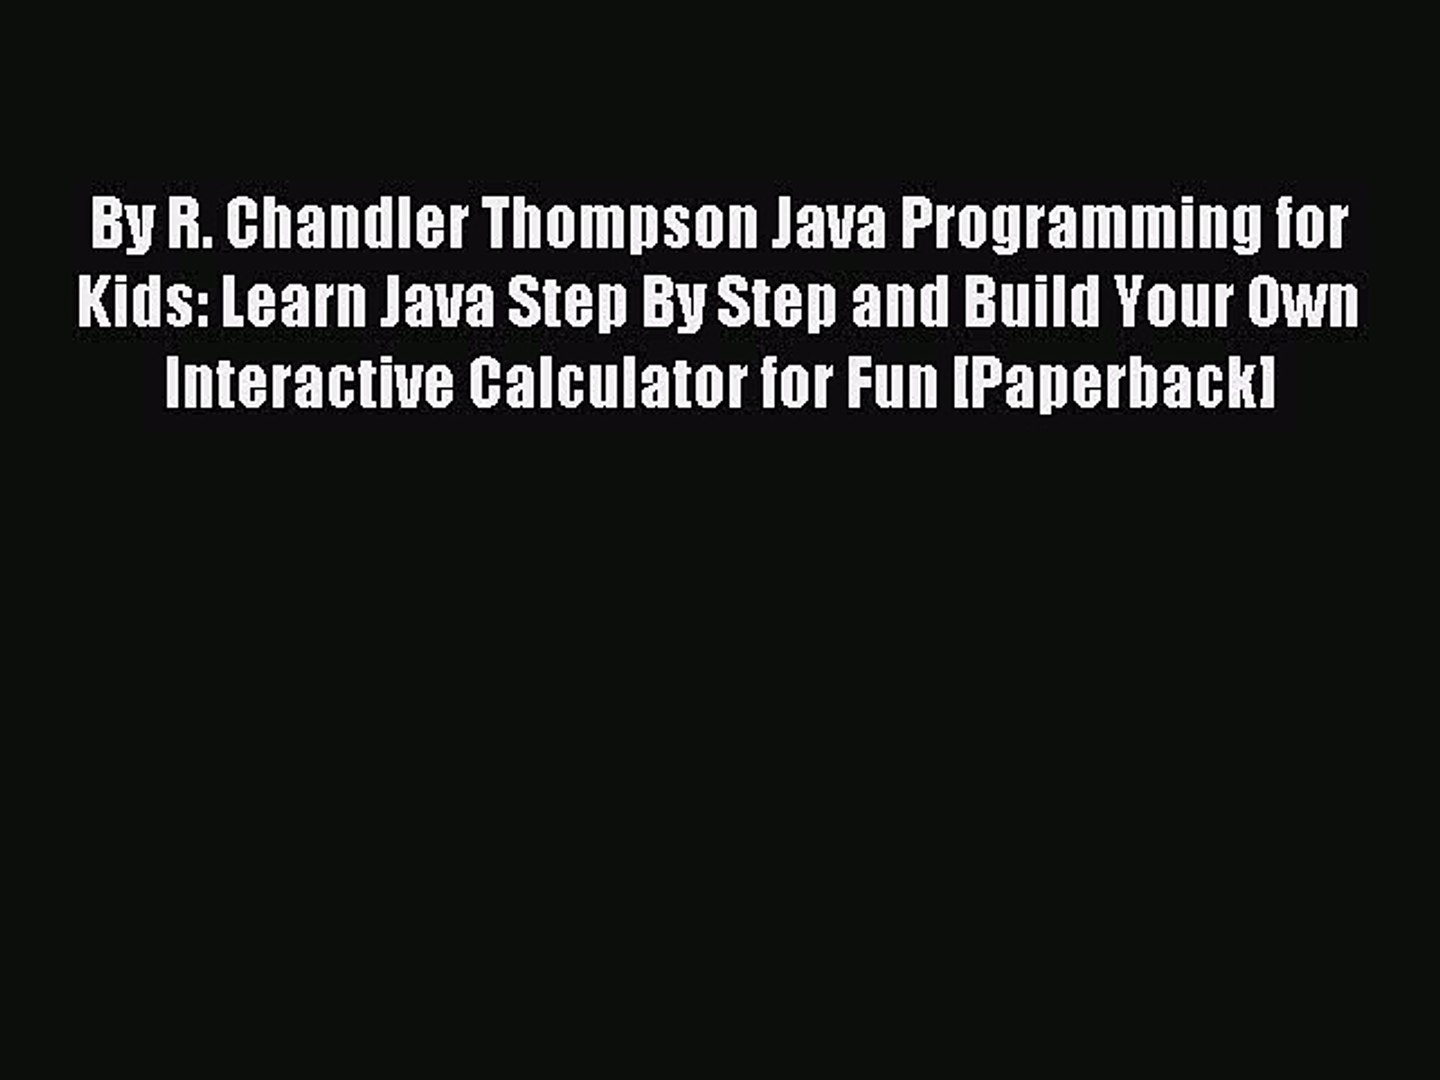 Download By R. Chandler Thompson Java Programming for Kids: Learn Java Step By Step and Build